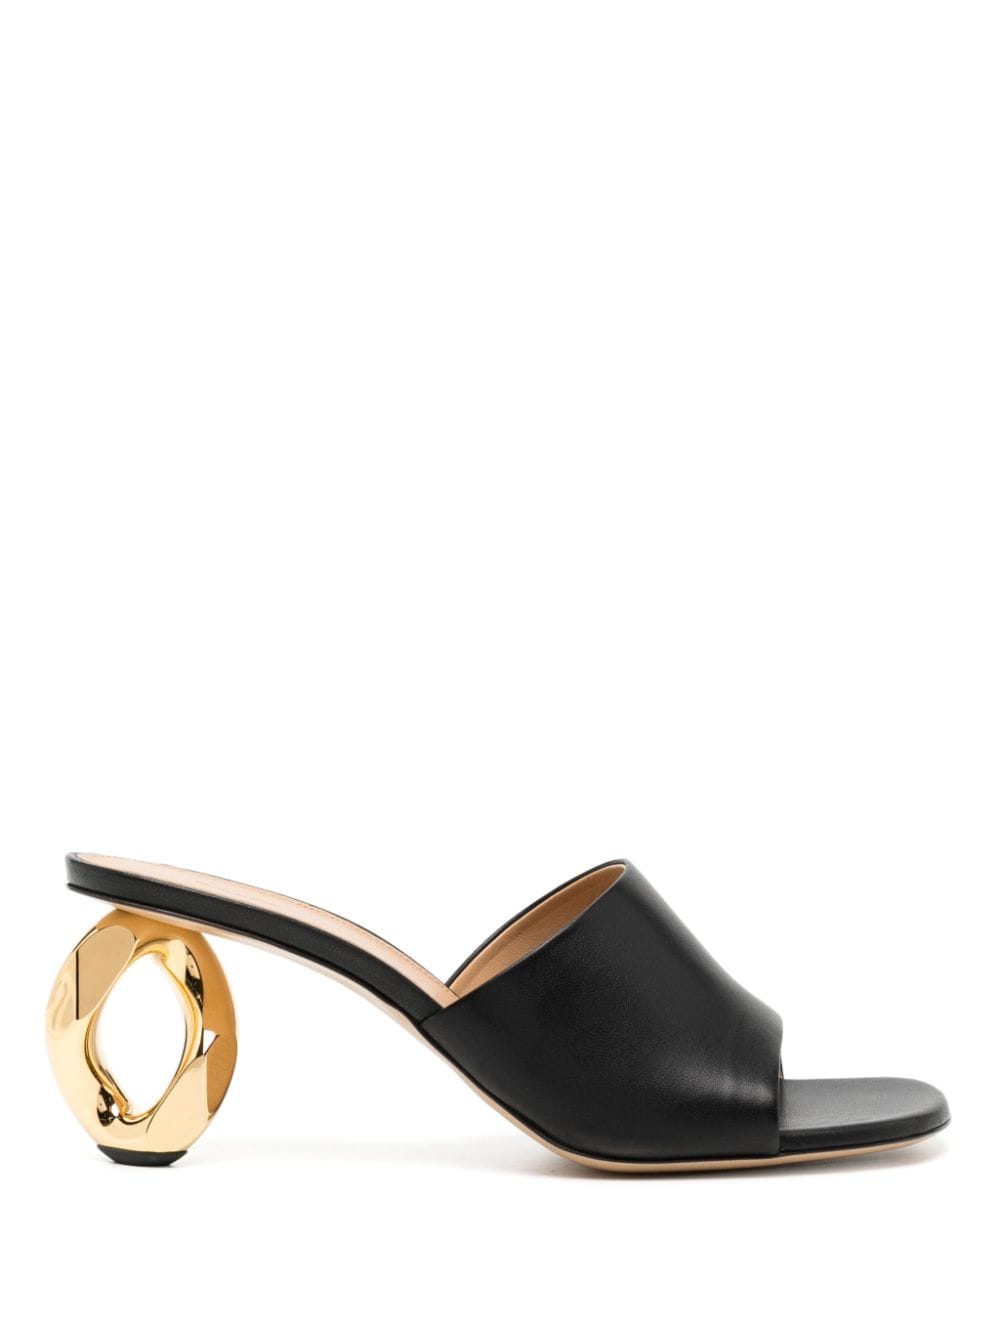 JW Anderson Chain Heel 70mm leather mules - Black